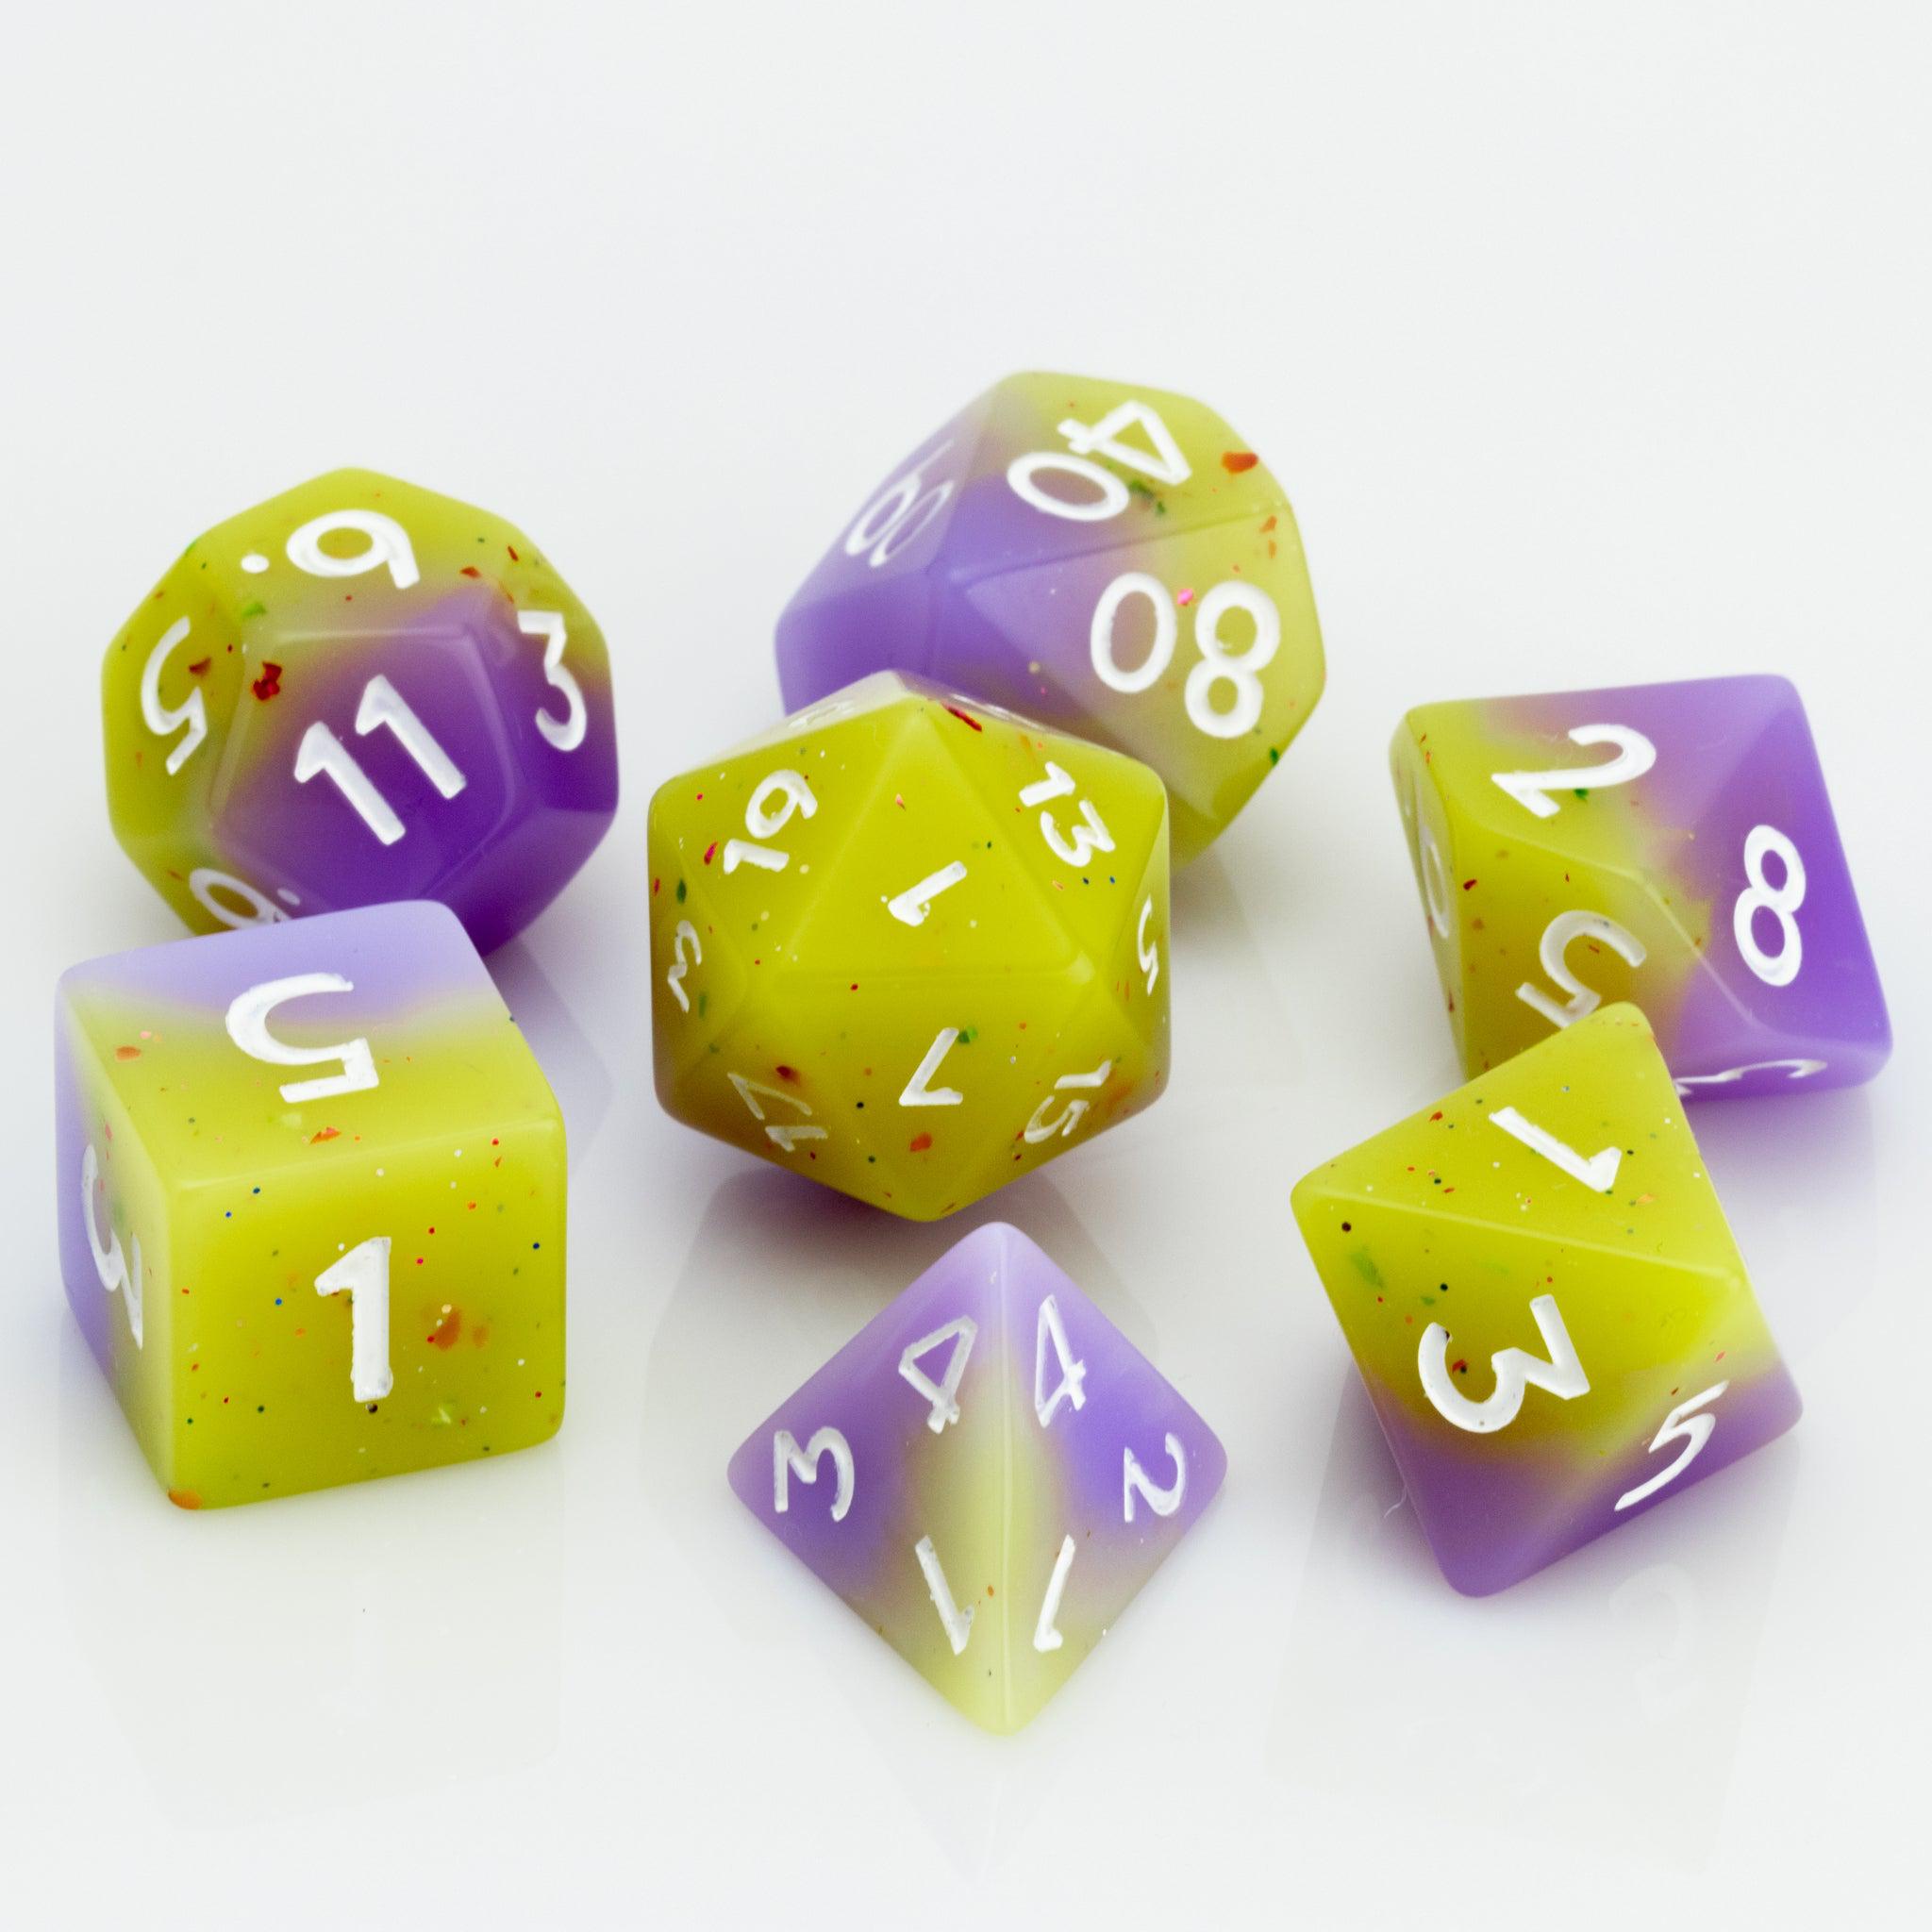 Cupcakes yellow & purple 7 piece RPG dice set on a white background.